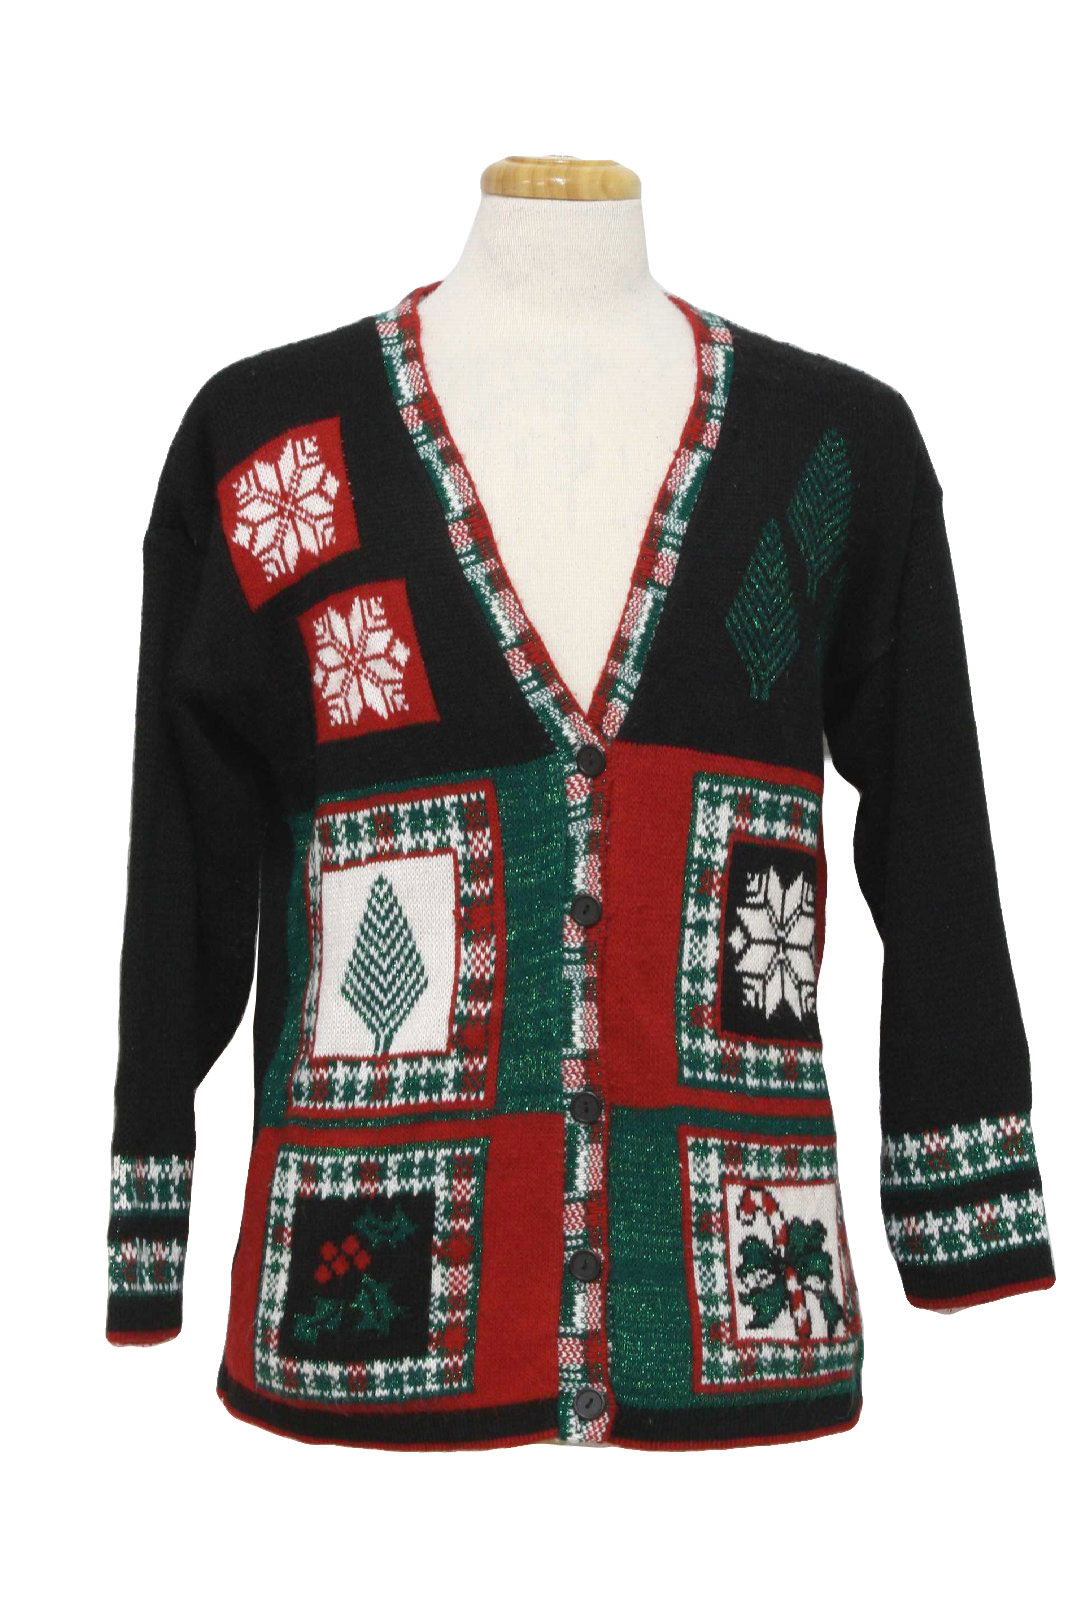 Eighties Ugly Christmas Cardigan Sweater: 80s authentic vintage ...